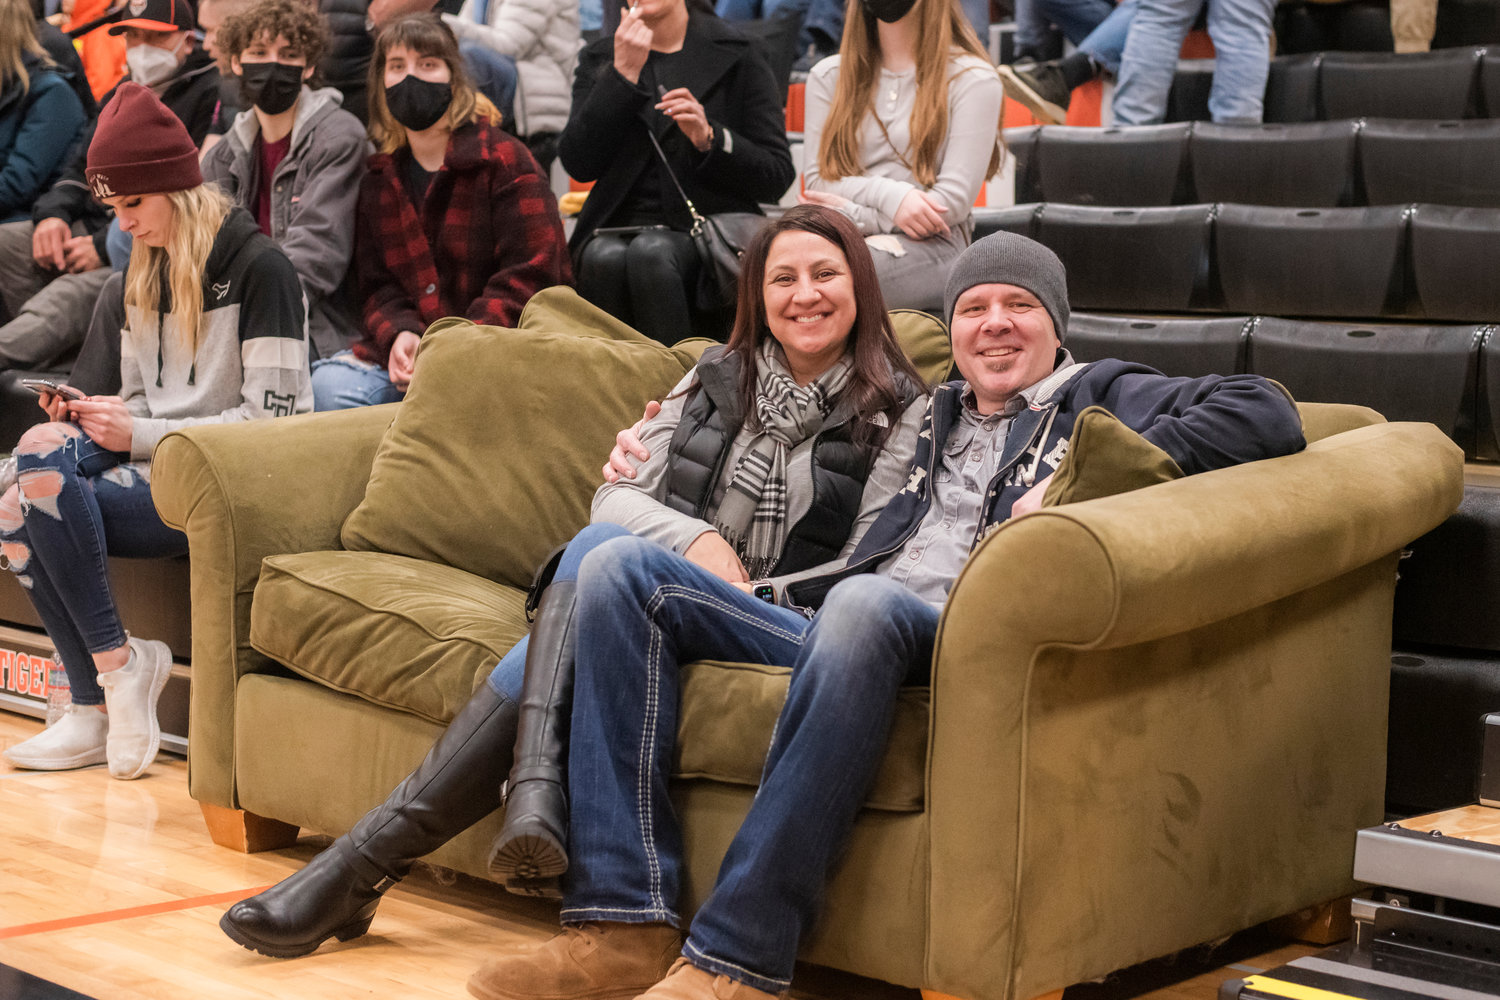 Hobe and Shoni Pannkuk smile and pose for a photo courtside on a couch Friday night at Centralia High School during a boys basketball game.